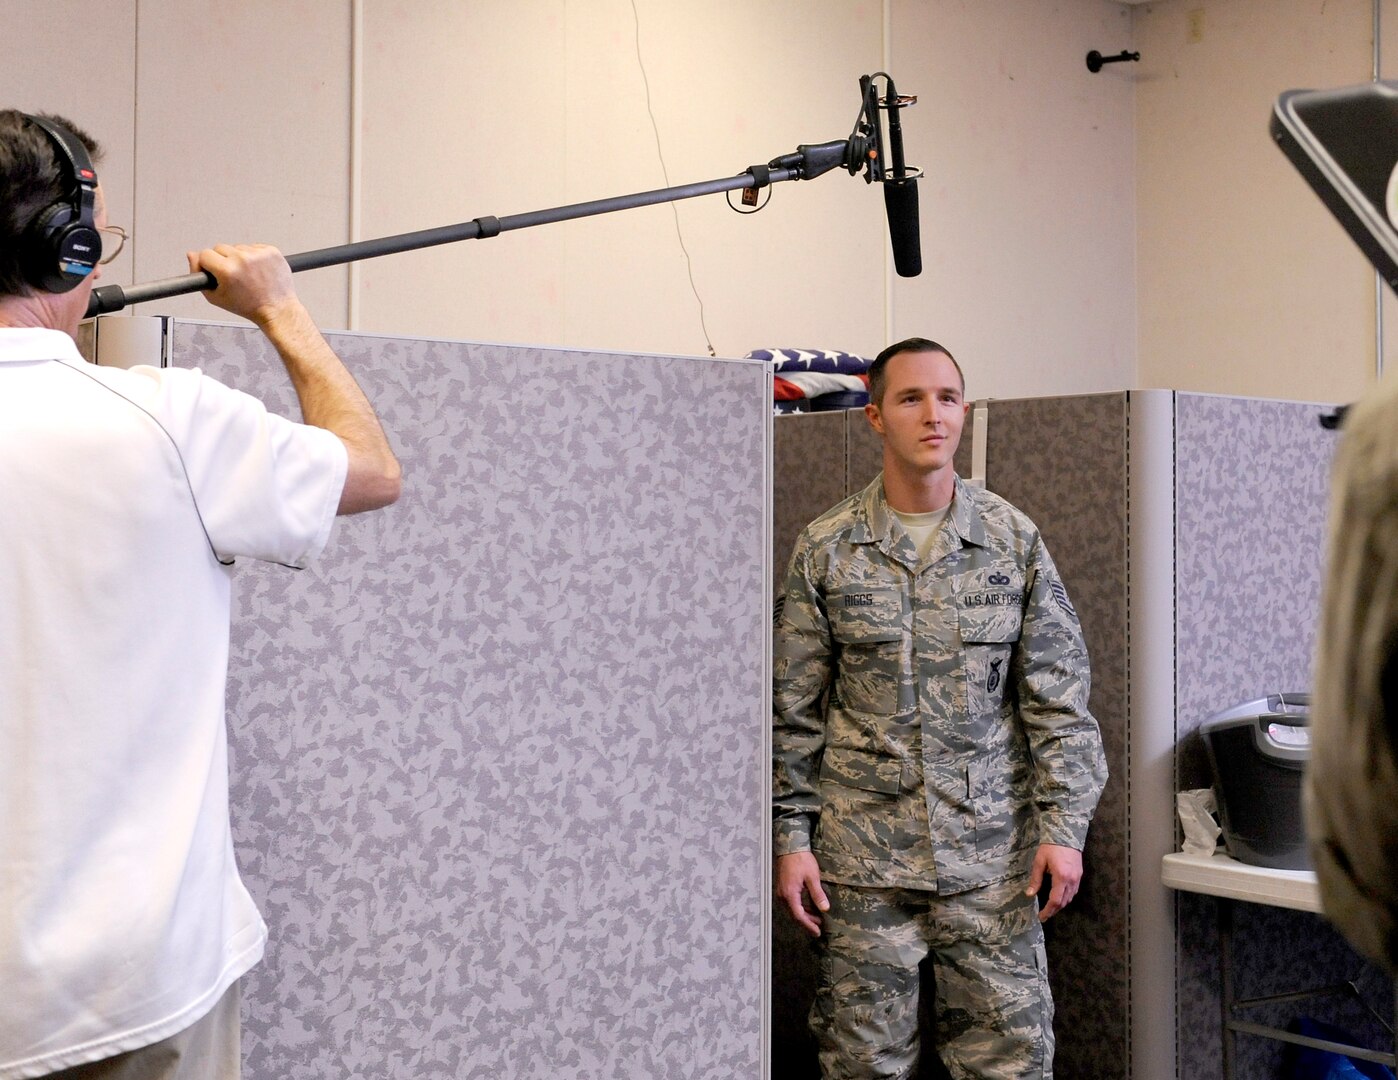 Devon Ryan an actor, portrays Staff Sgt Riggs during the recording of one of the scenarios to be included in the What Now Airman series for Defenders, Joint Base San Antonio – Randolph, Texas, March 19, 2018. The Defender training video is being developed to support the new Air Force Global Strike Command Security Forces New Supervisor Workshop and other Security Force units in the Air Force.